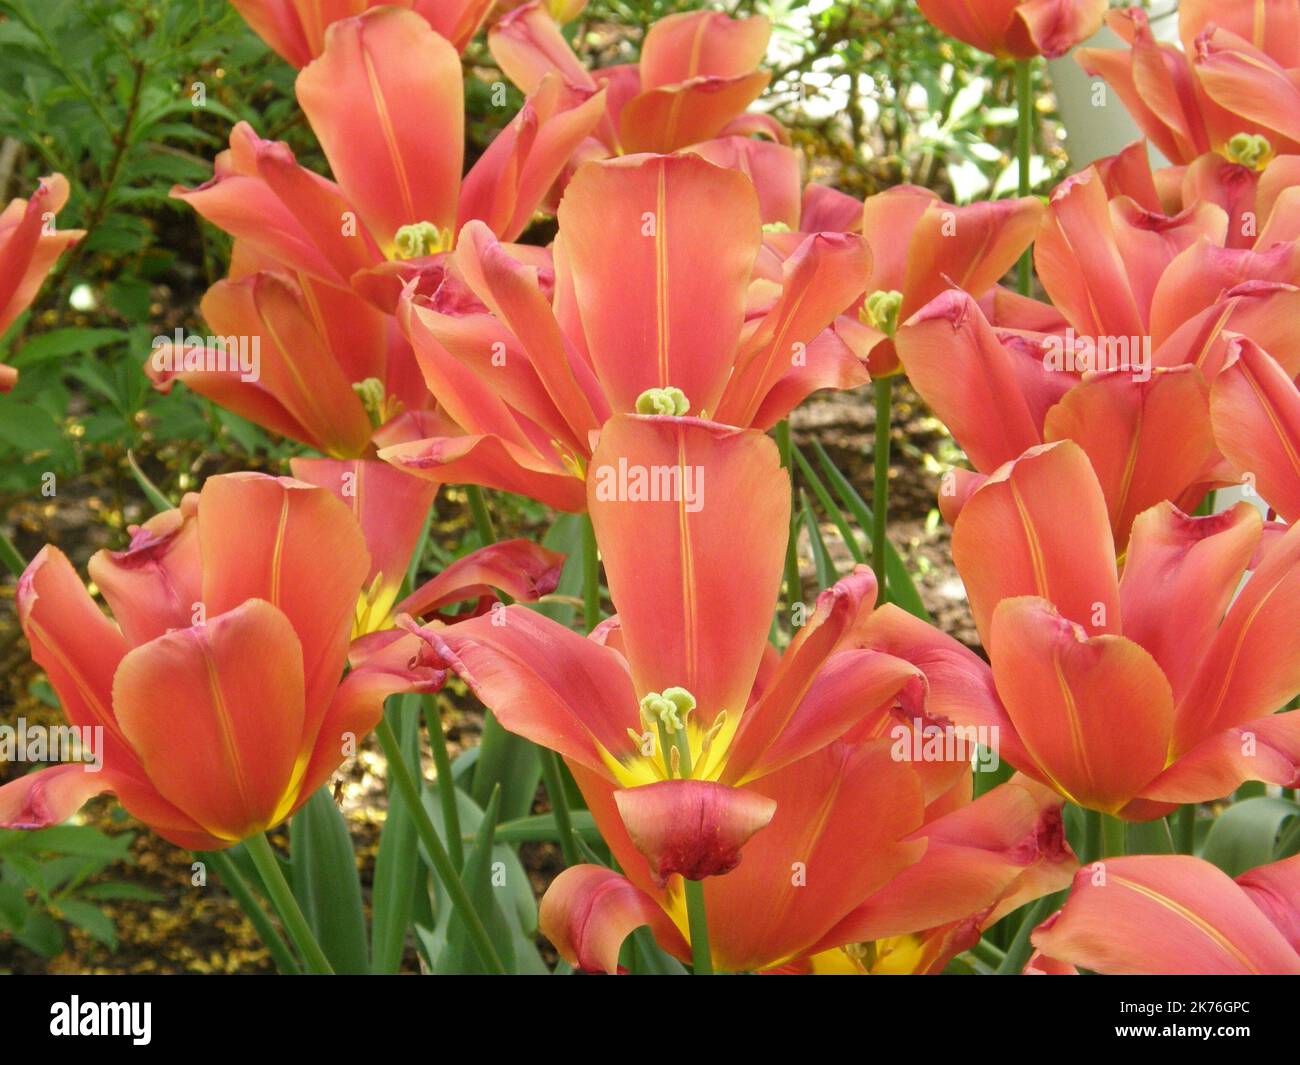 Red Single Late tulips (Tulipa) Sky High Scarlet bloom in a garden in April Stock Photo